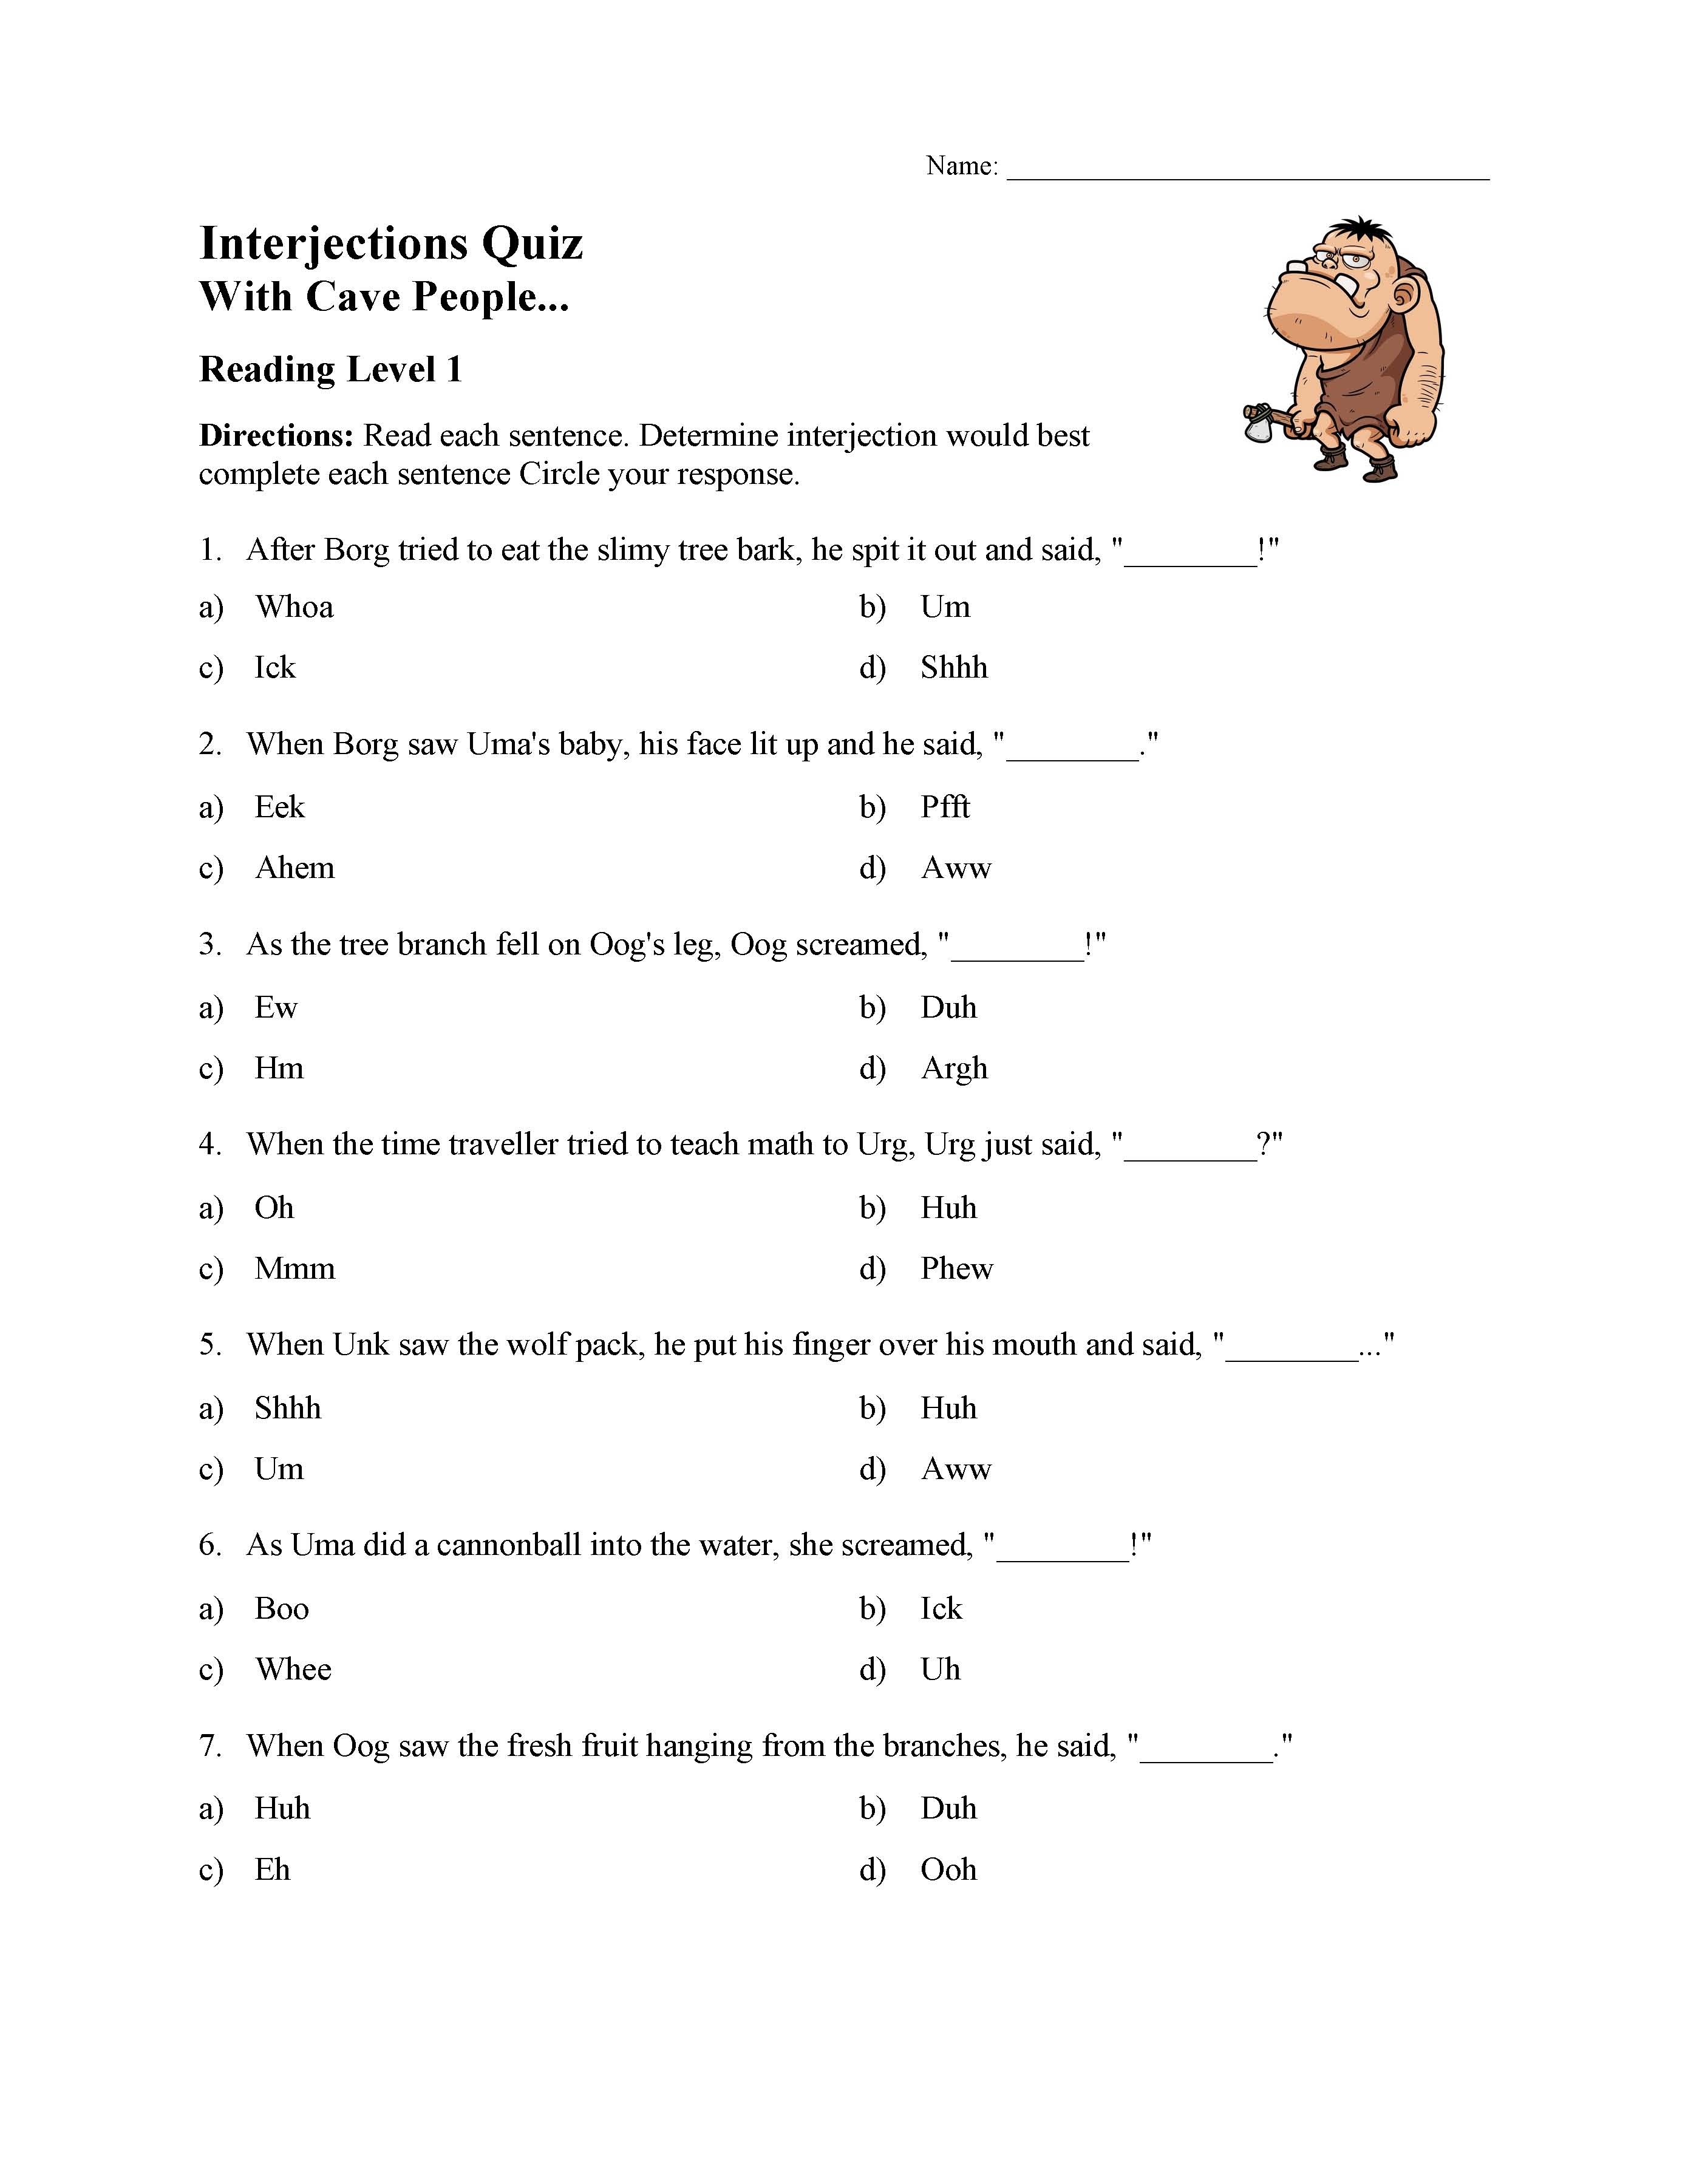 Interjections Quiz Reading Level 1 Preview